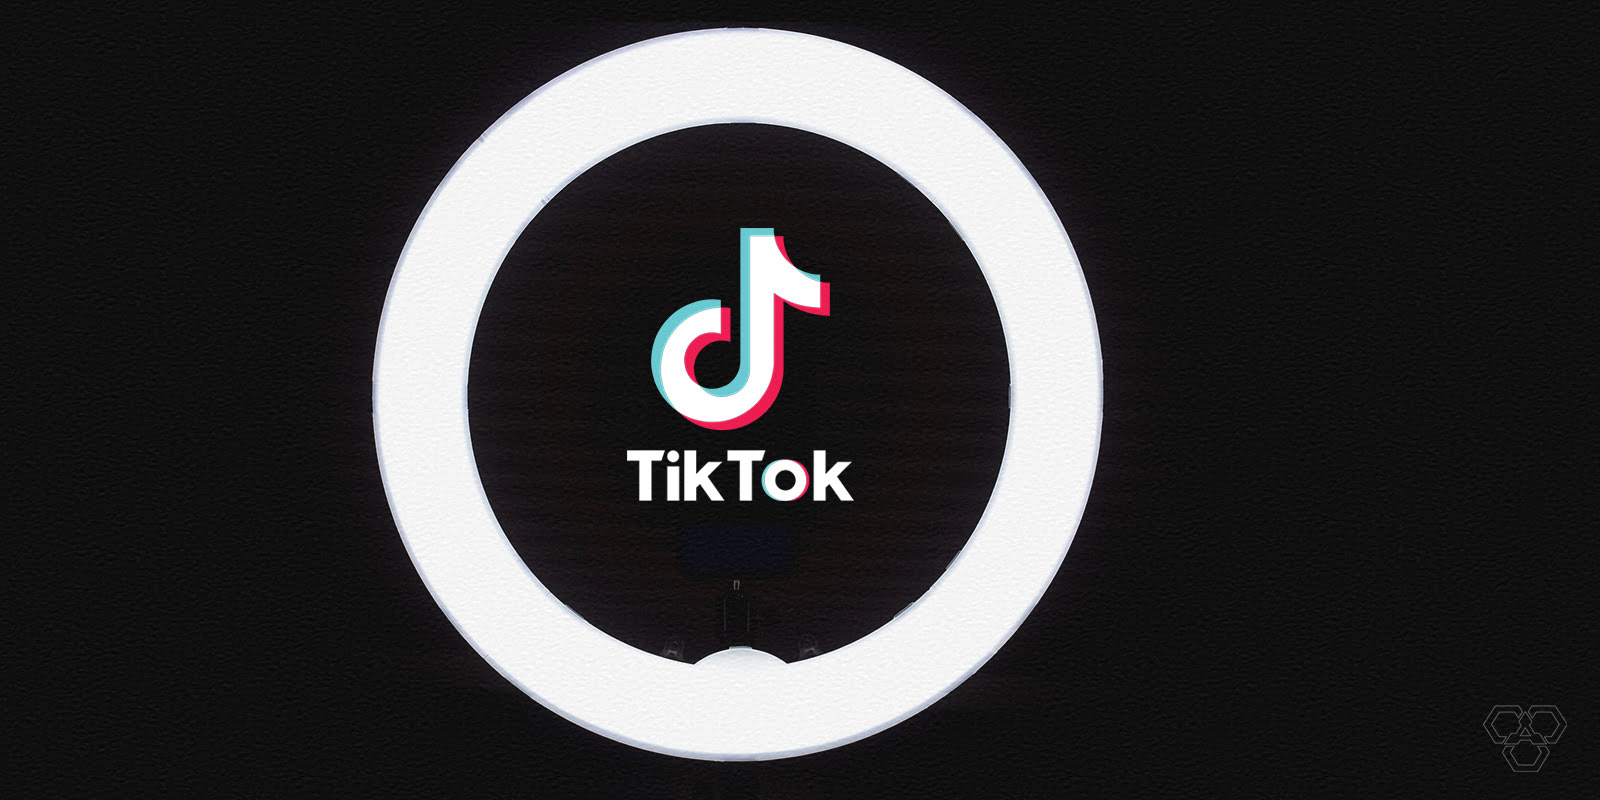 Tiktok Introduces A ‘Time Limit’ For Children Under 14 In China